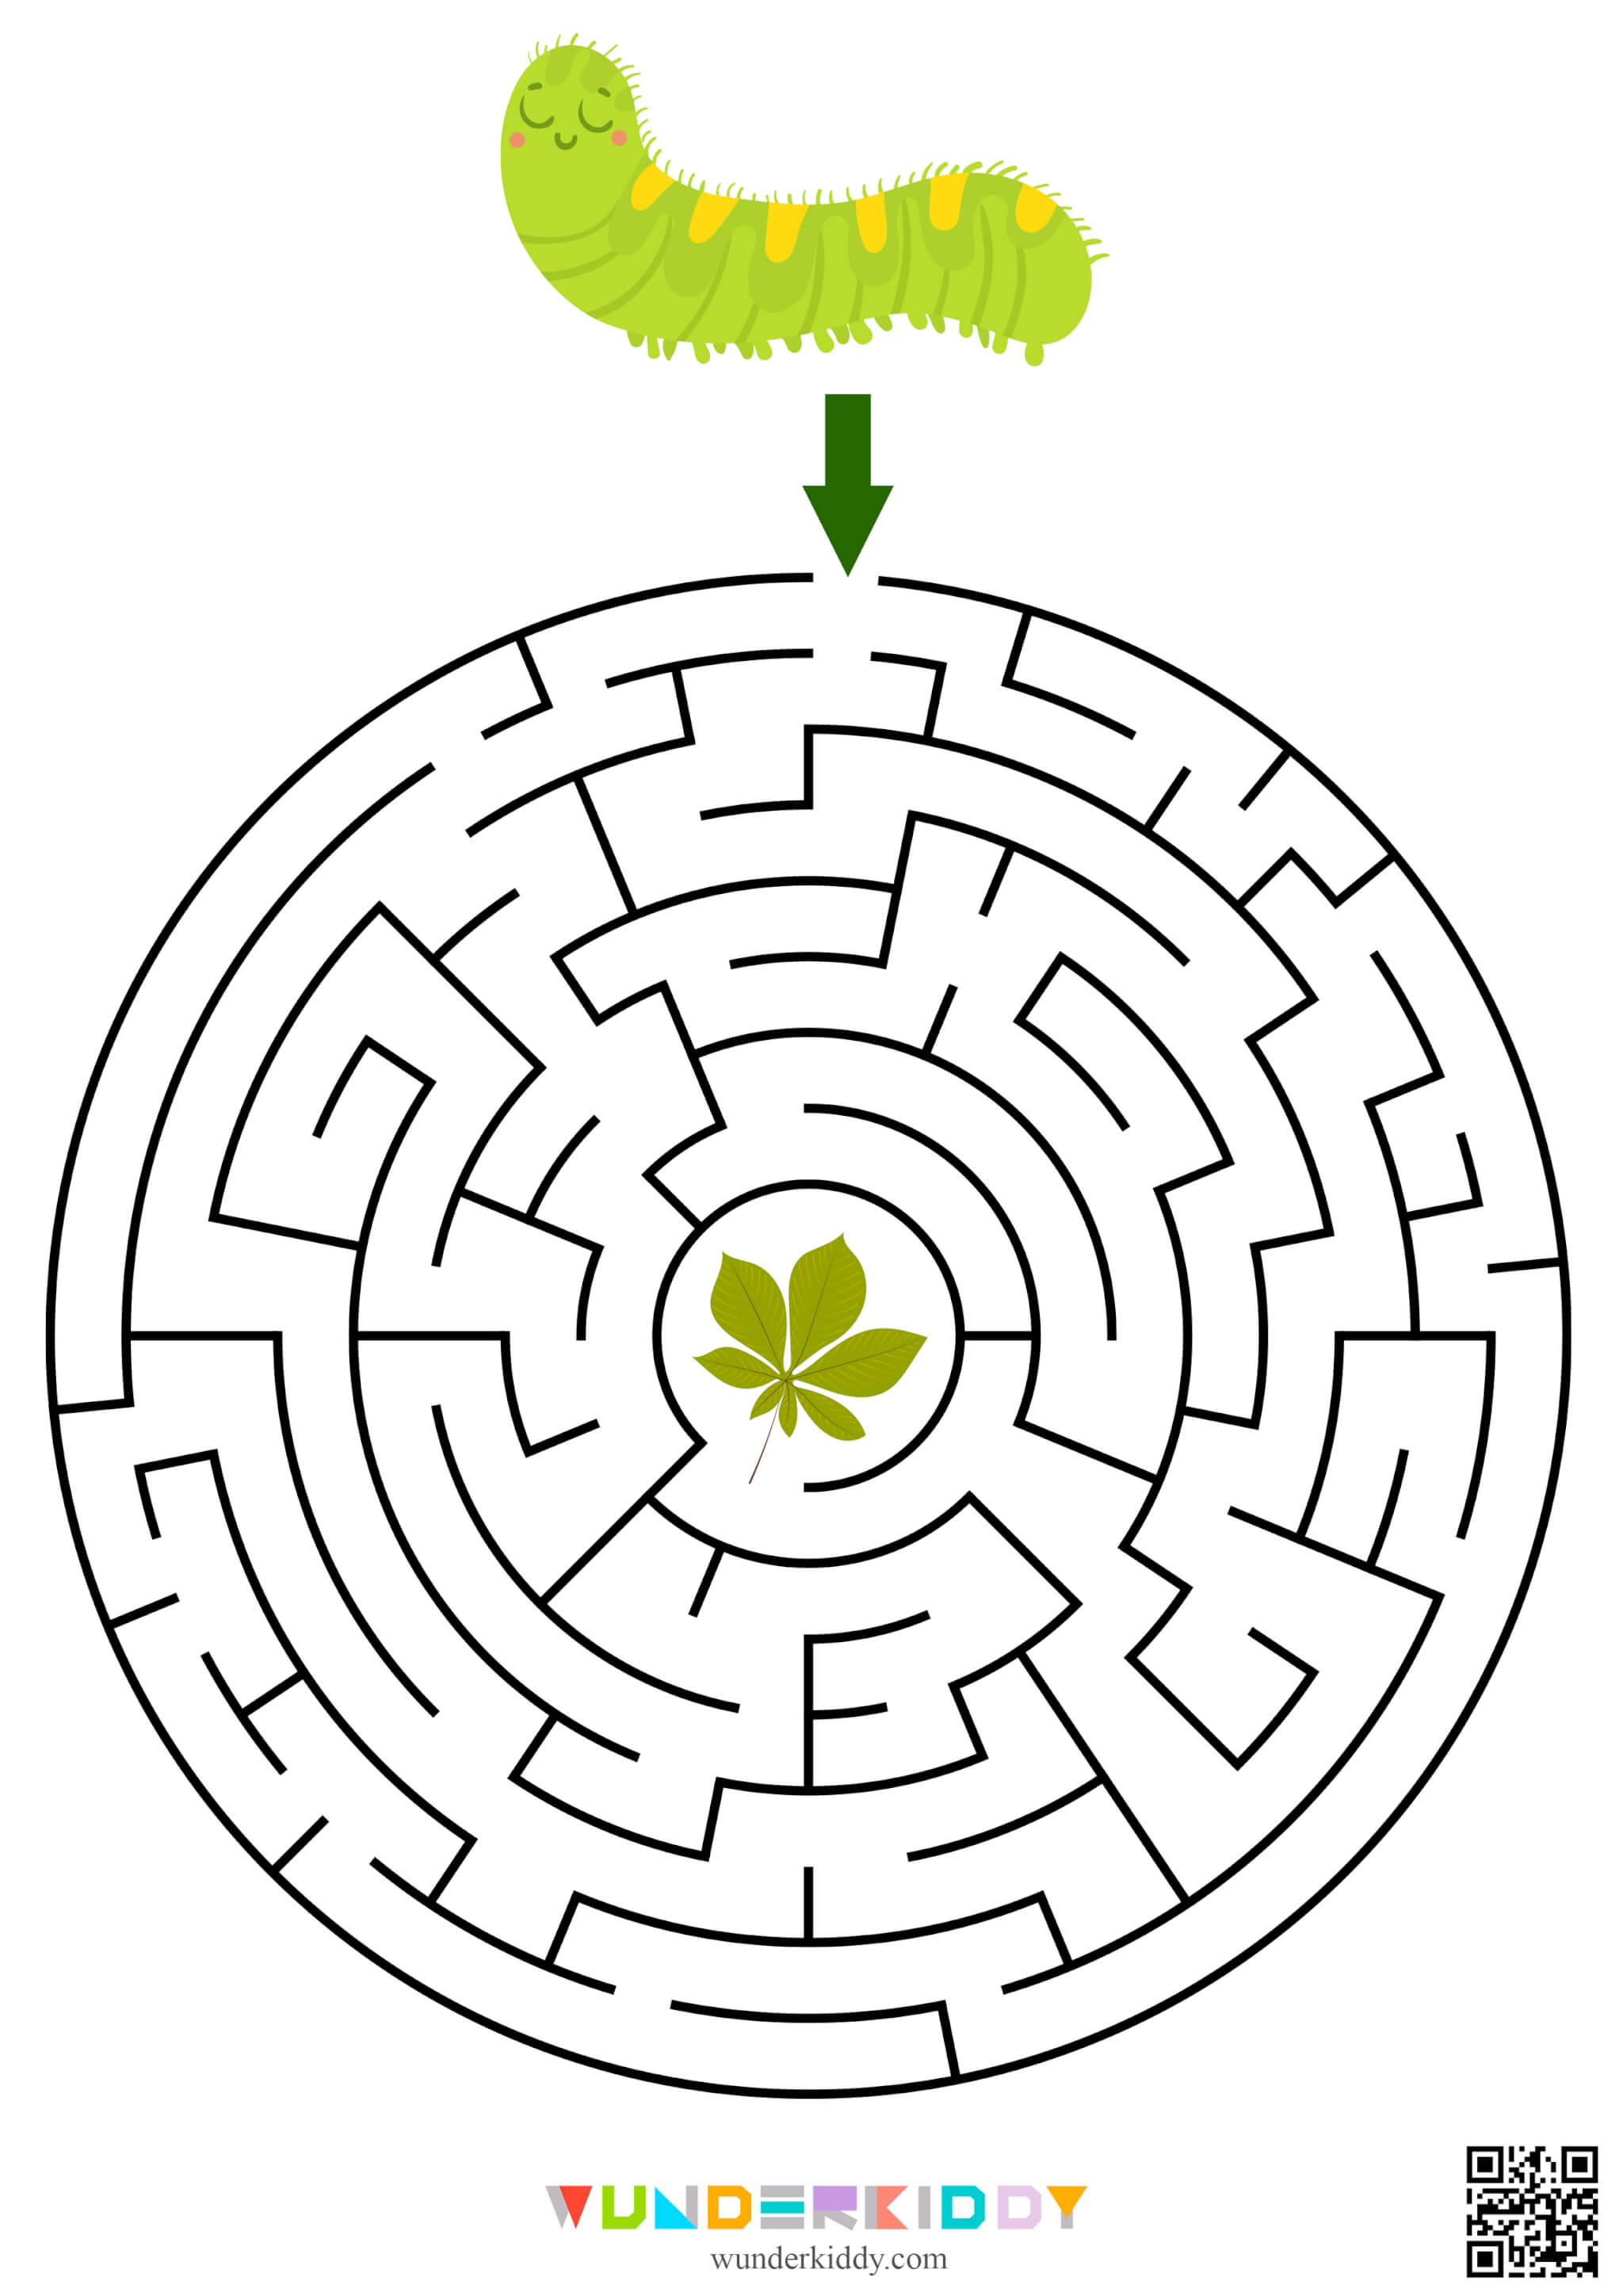 Printable Maze for Kids Help to Find the Way - Image 4